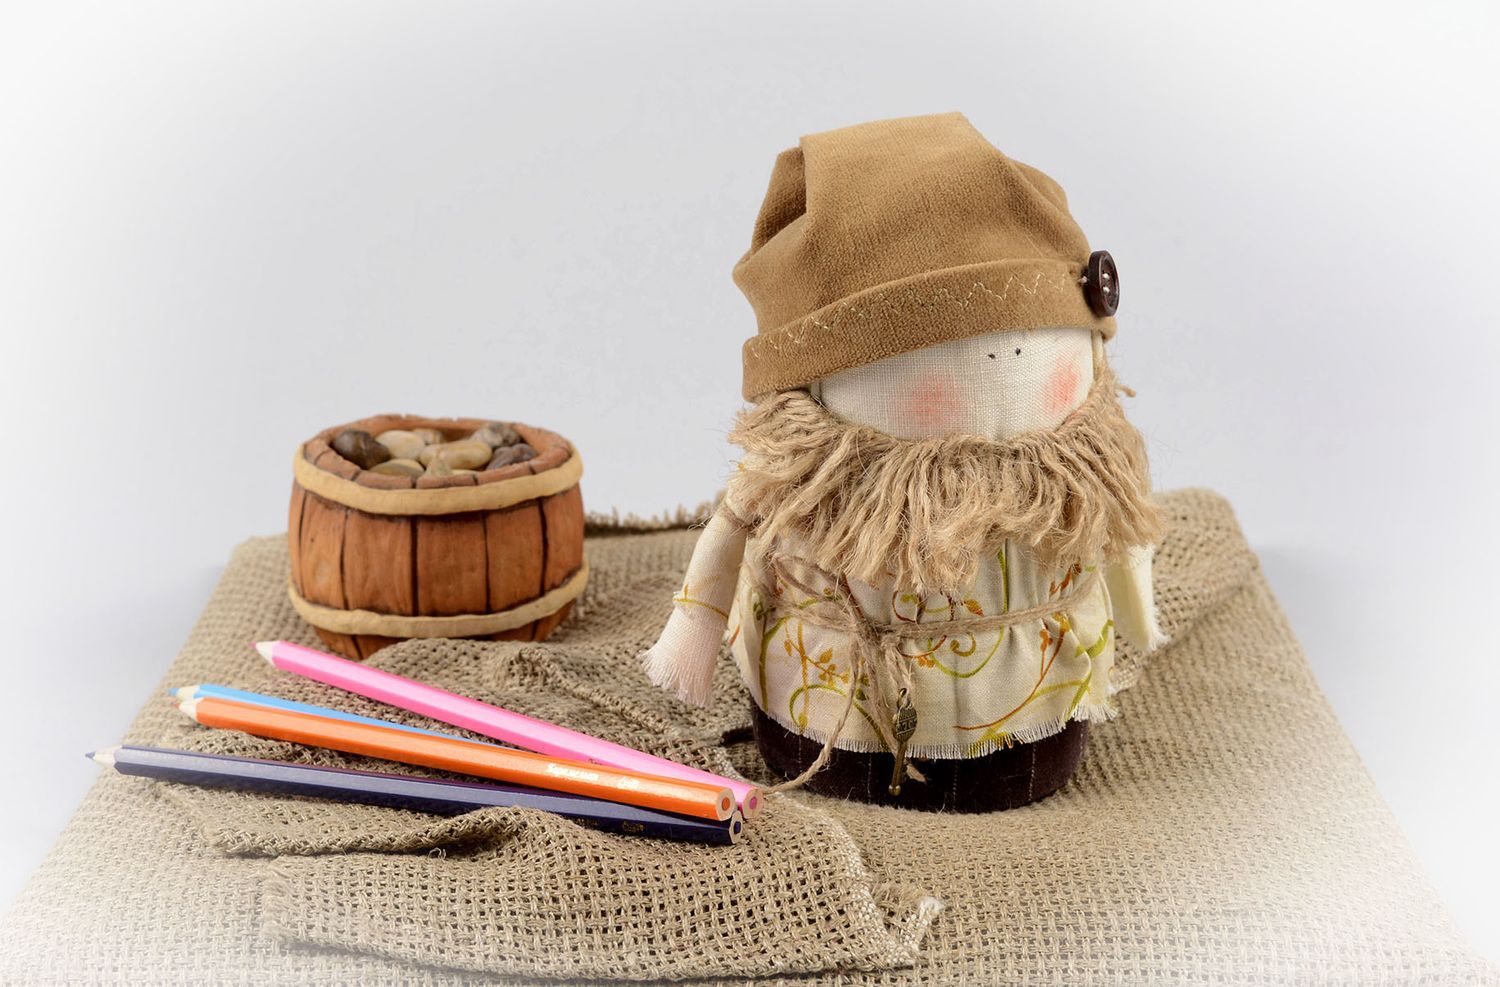 Handmade doll decorative use only unusual gift for kids interior decor photo 5